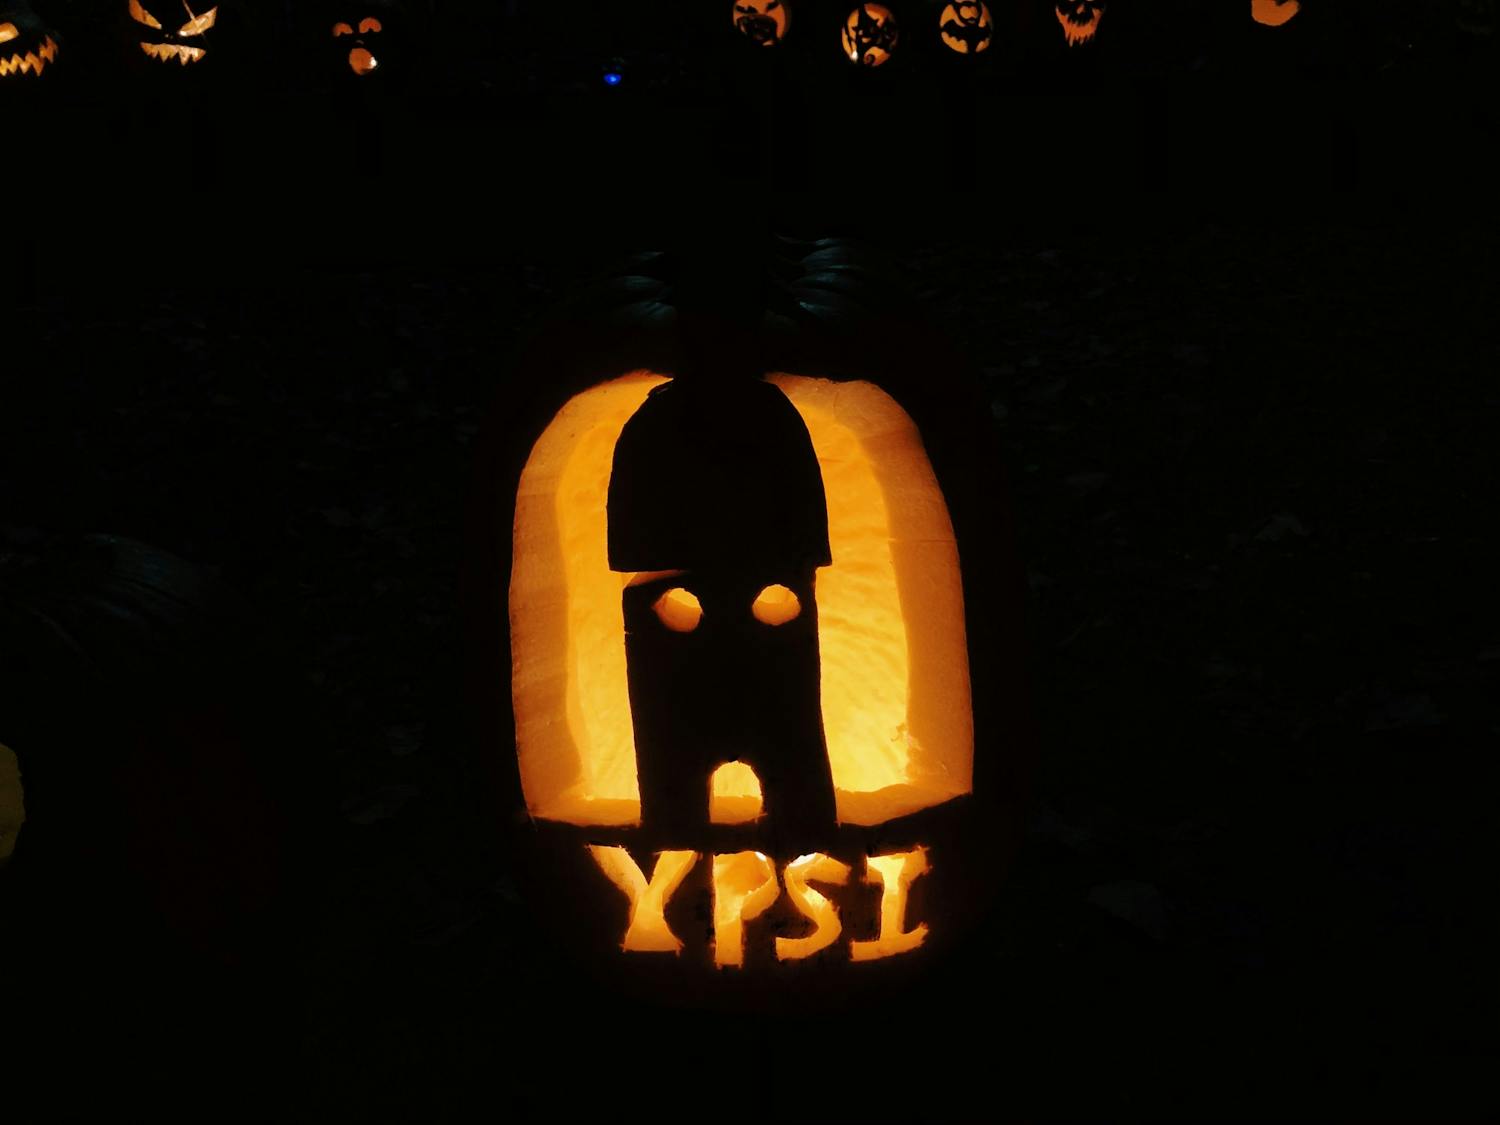 Ypsi water tower carved into pumpkin at All Hallows Illumination